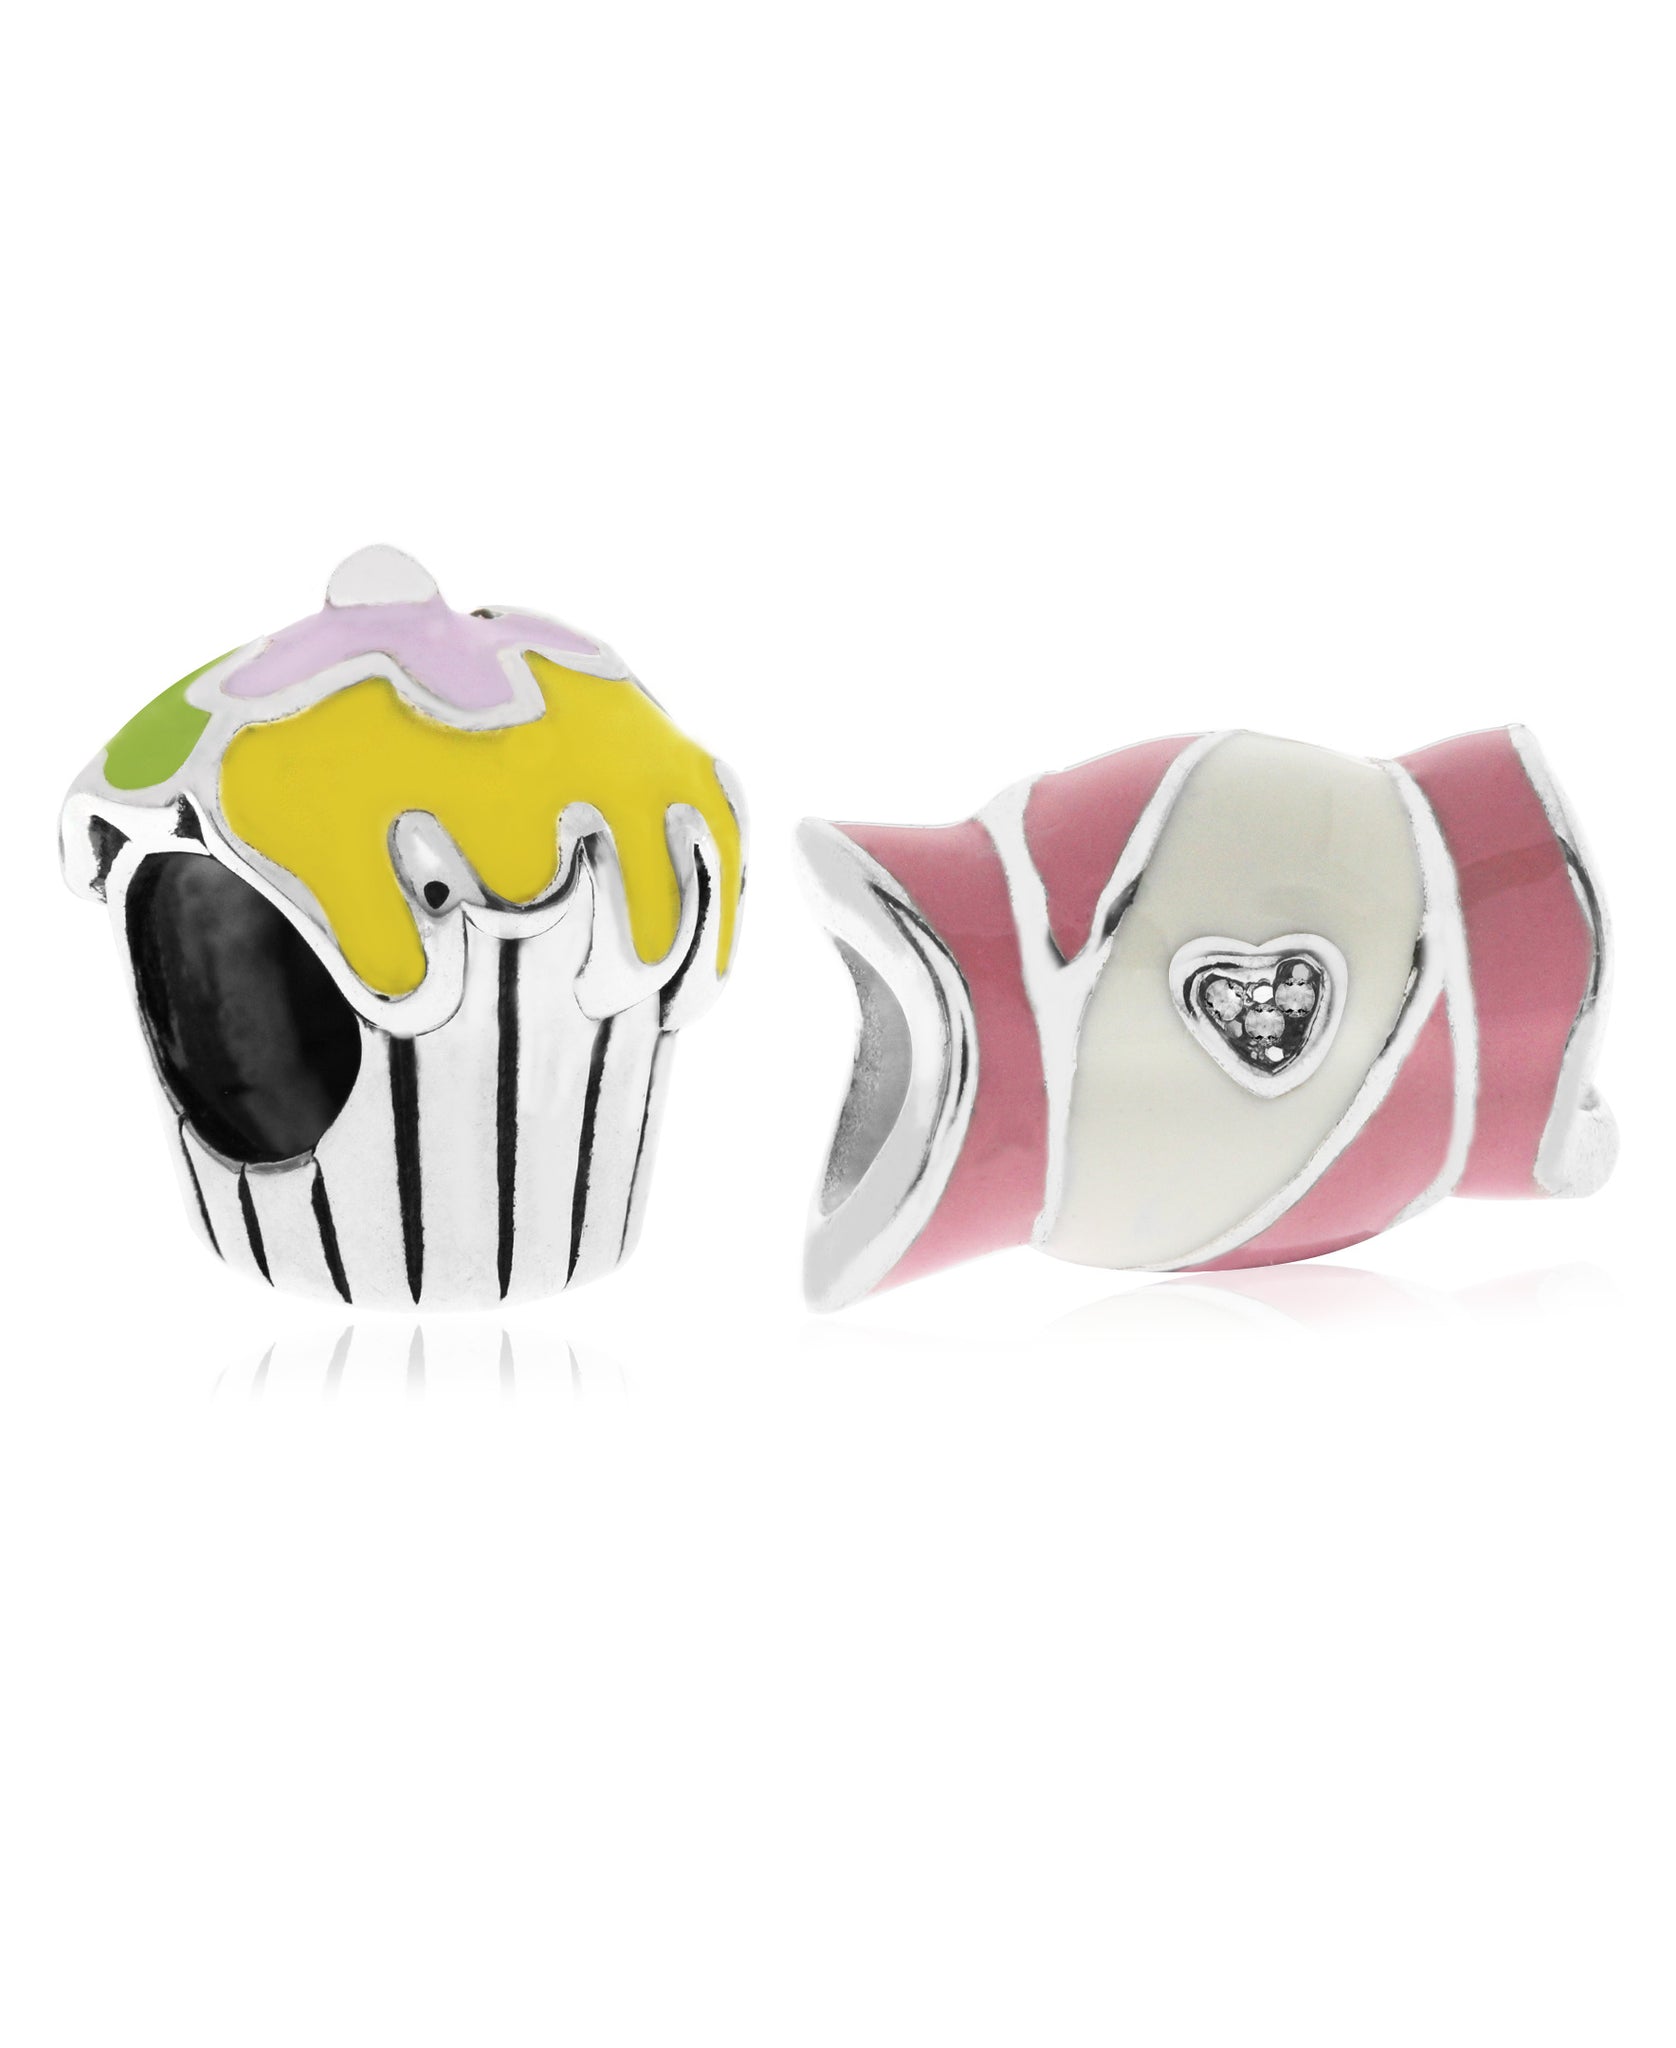 Children's Sterling Silver & Enamel Candy & Cupcake Bead Charms - Set of 2 - Rhona Sutton Jewellery